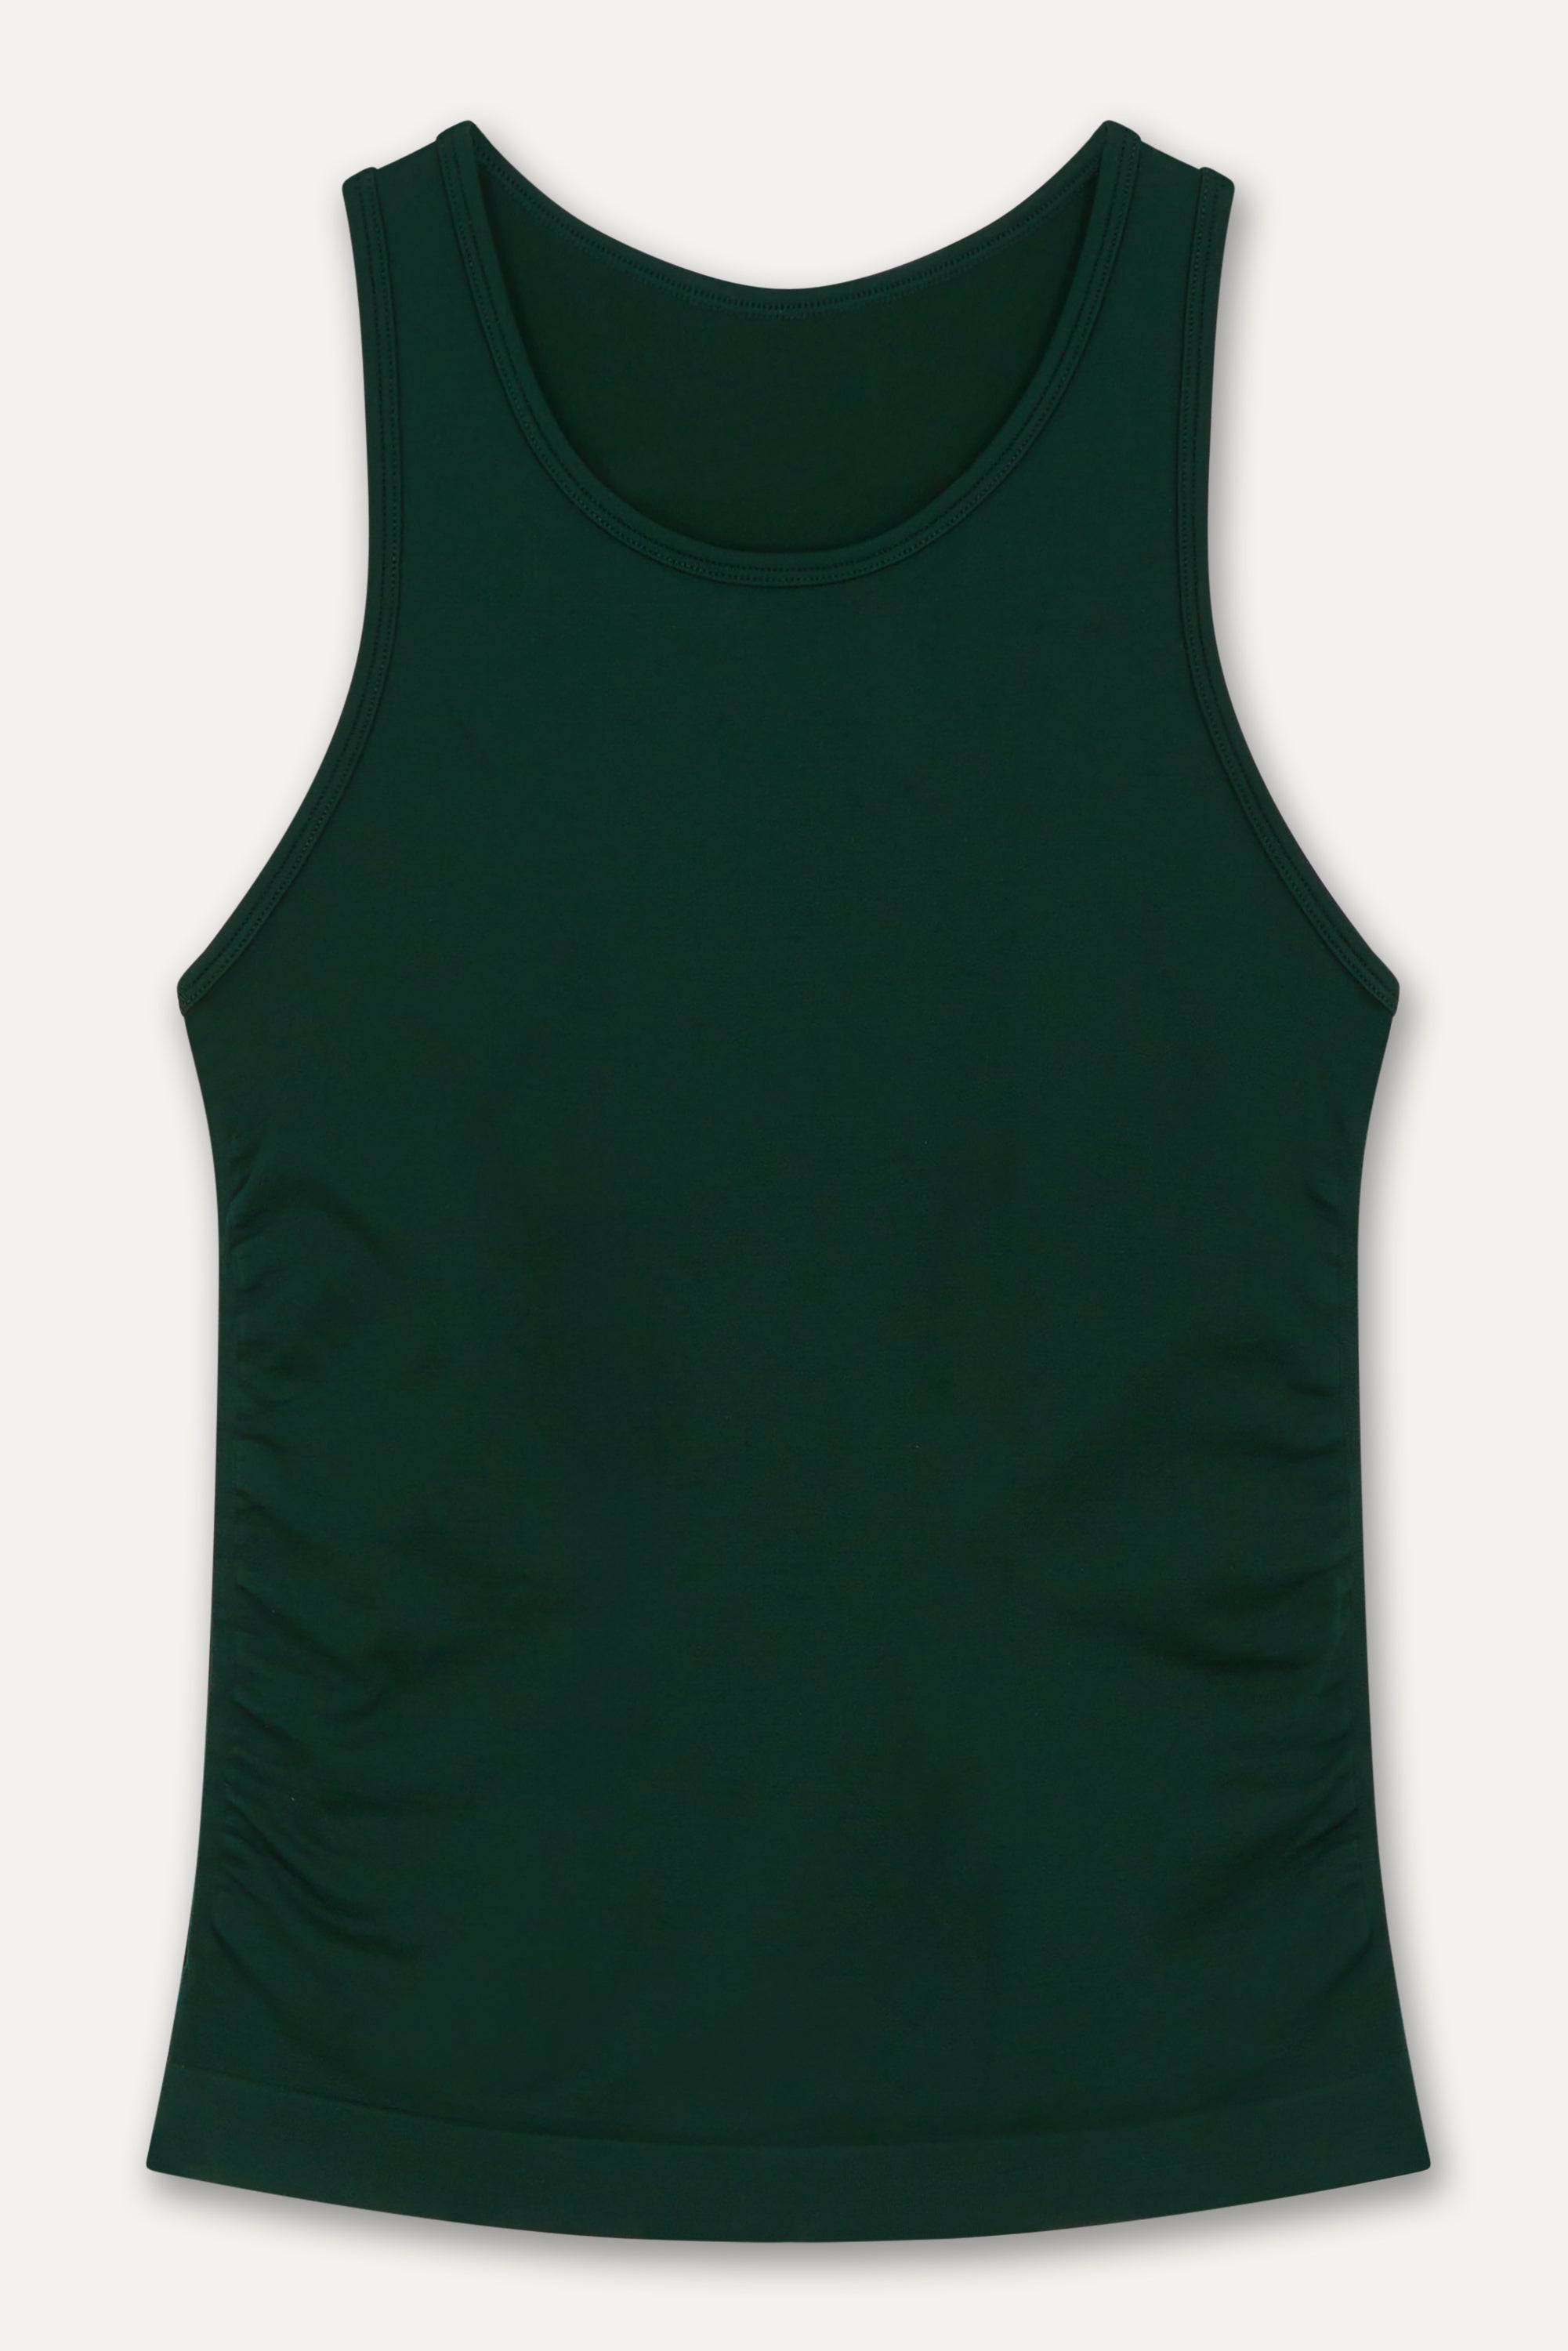 Dark green seamless recycled moisture wicking sleeveless tank top with side ruching for yoga, pilates, gym, cycling, running and exercise by sustainable activewear brand Jilla Active